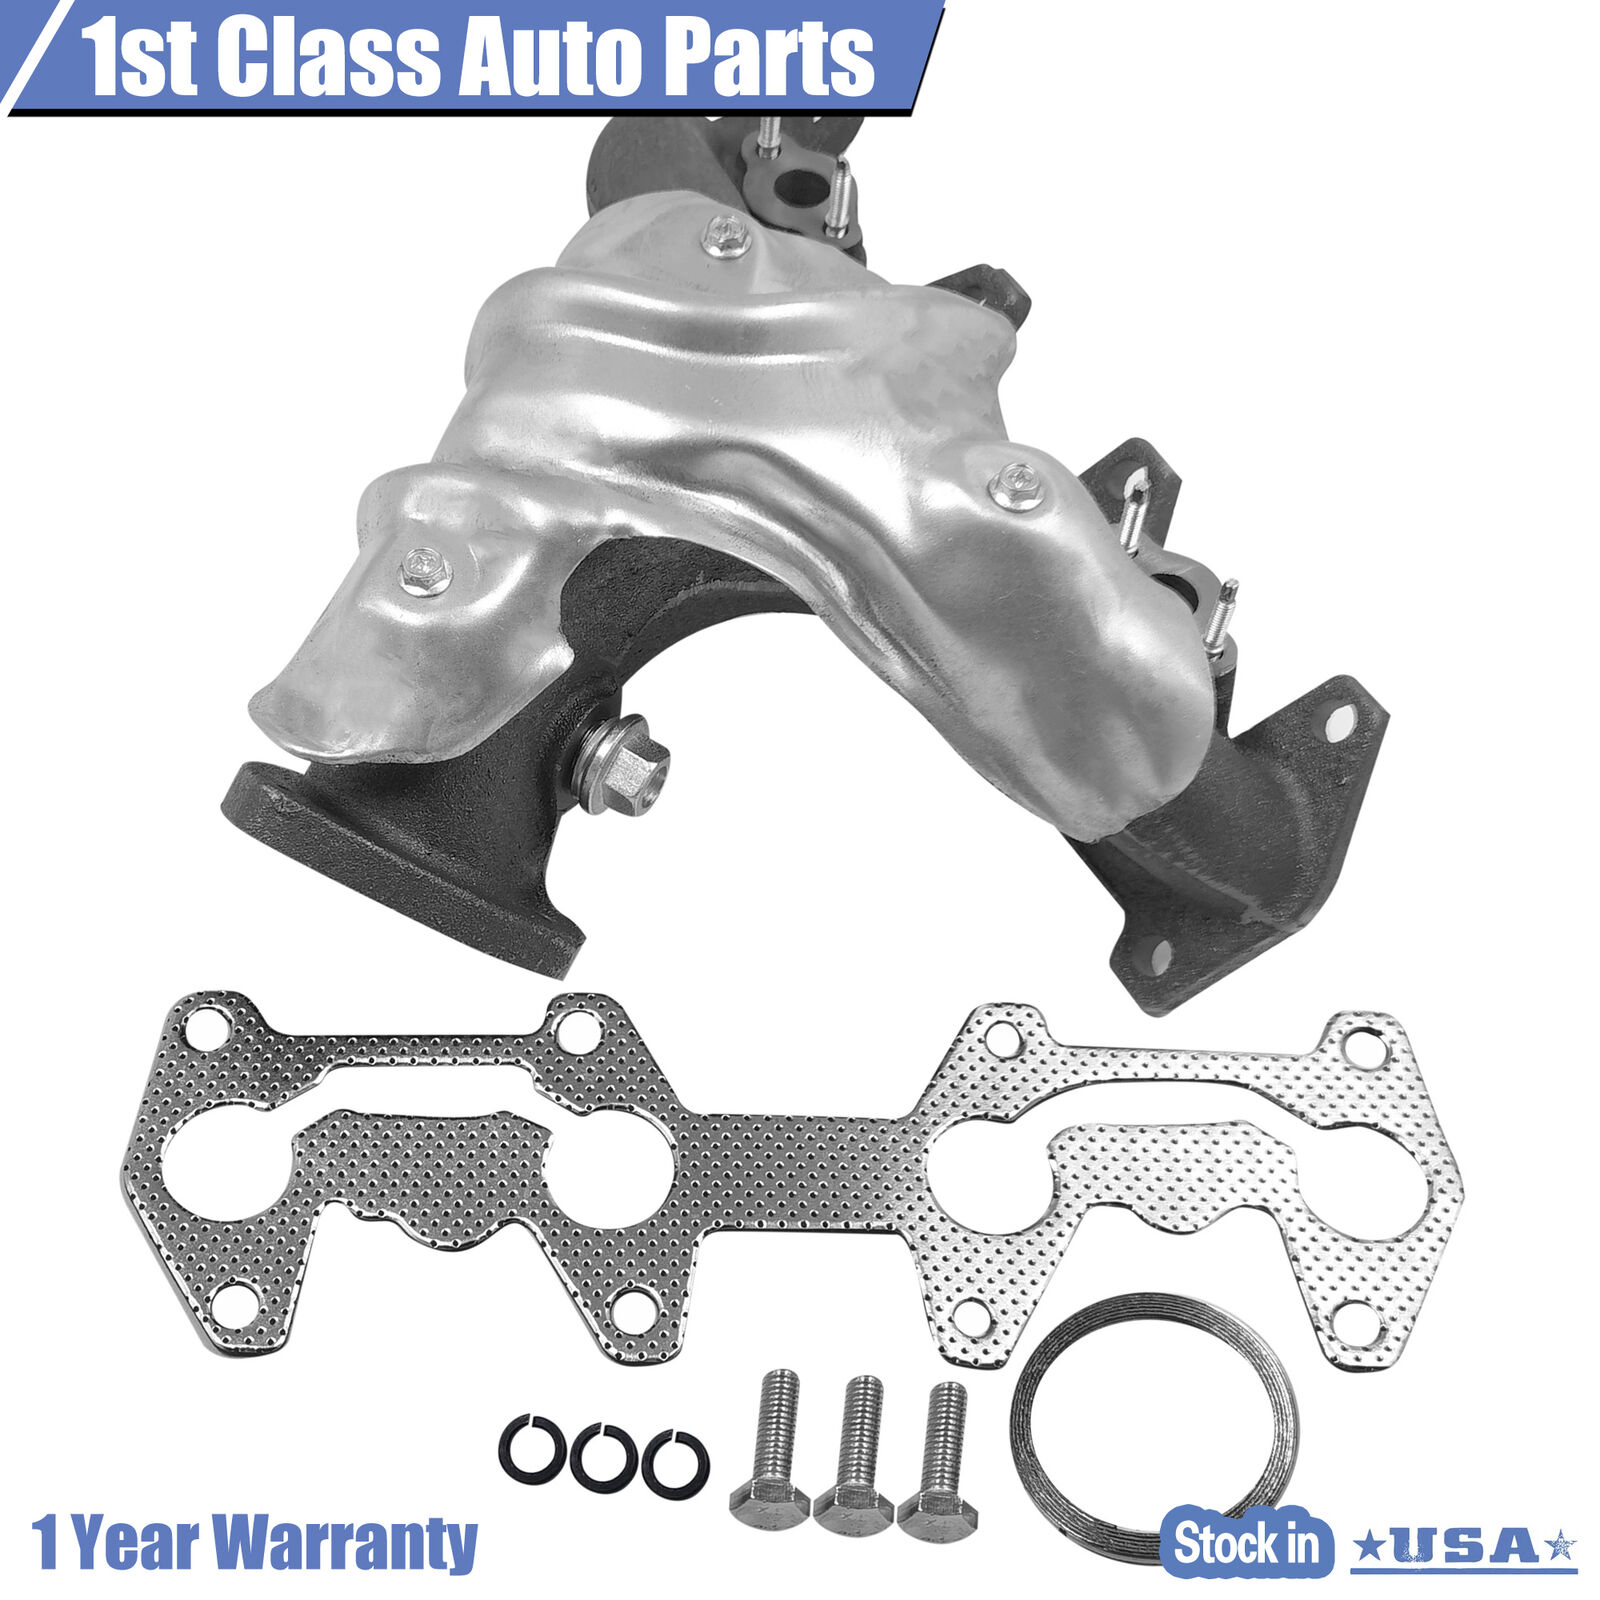 Exhaust Manifold For 2000-2003 Chevrolet S10 Pickup GMC Sonoma 674-675 24577360